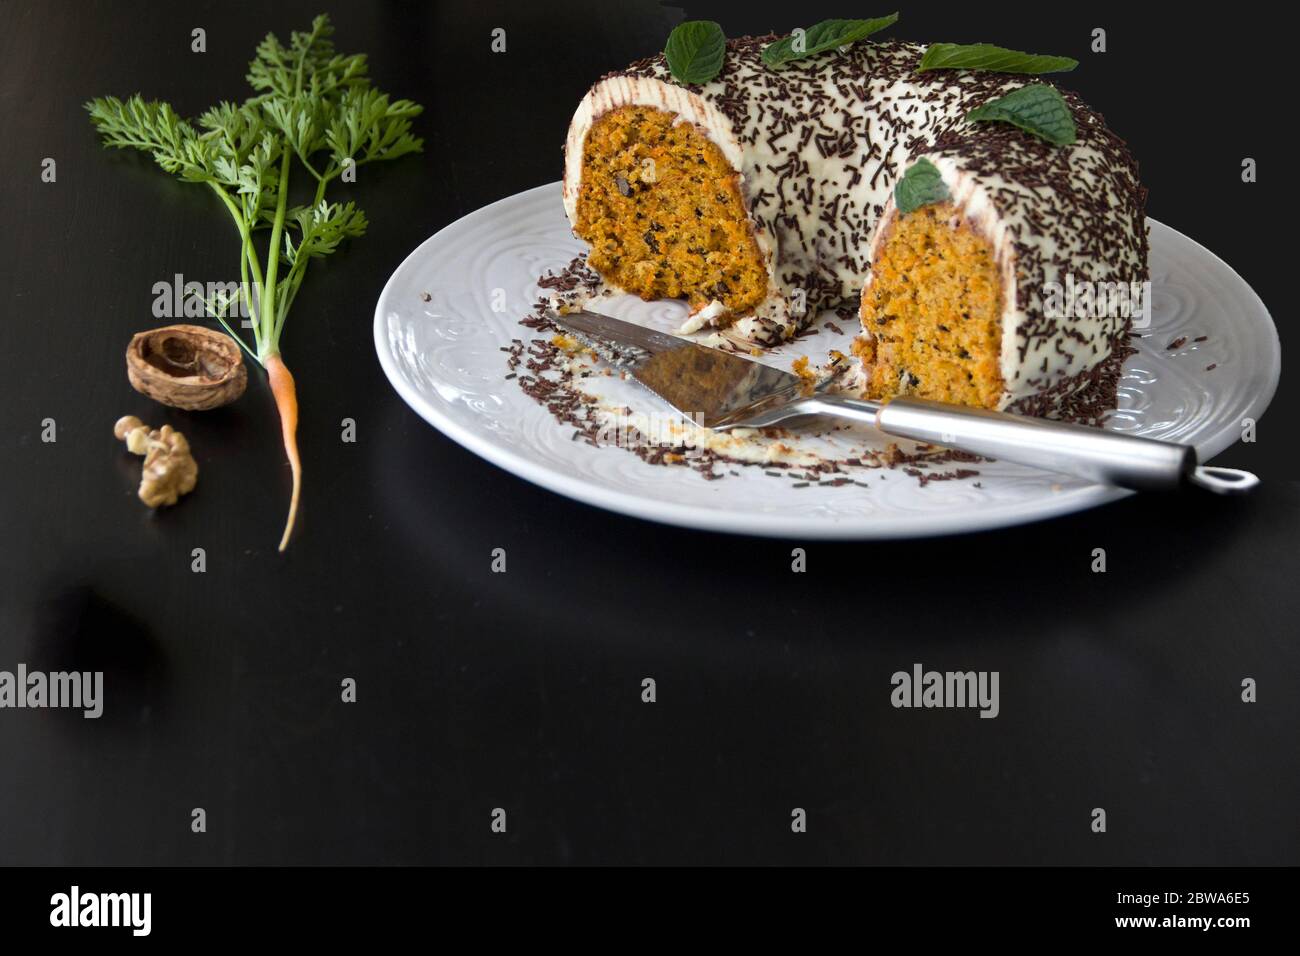 Homemade carrot cake on a large white dish on a dark background. Selective focus, copy space Stock Photo